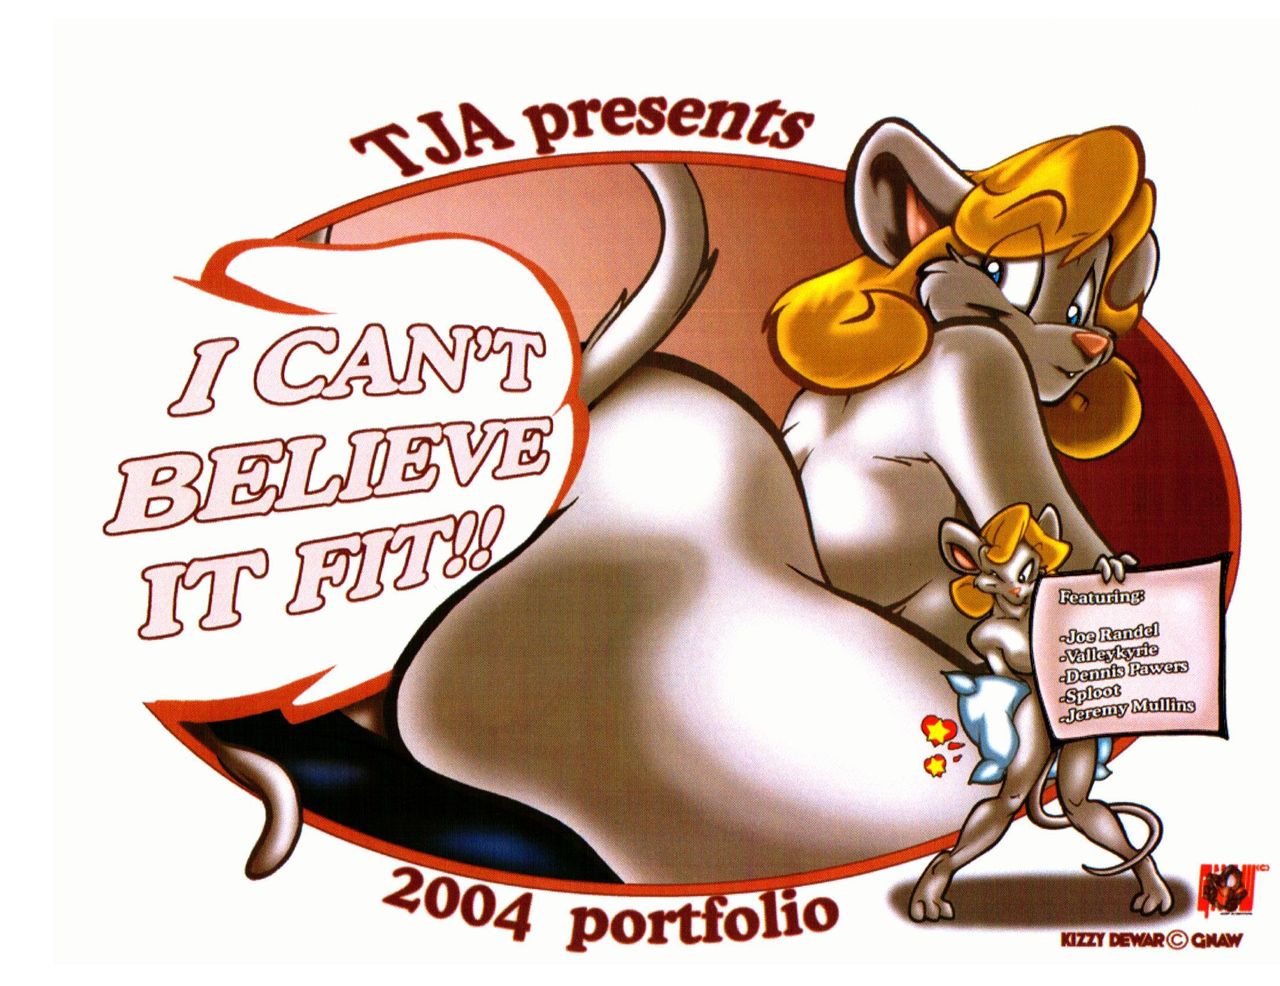 [Furry]TJA(The jab archuive) - I Cant Believe it Fit Folio 2004 